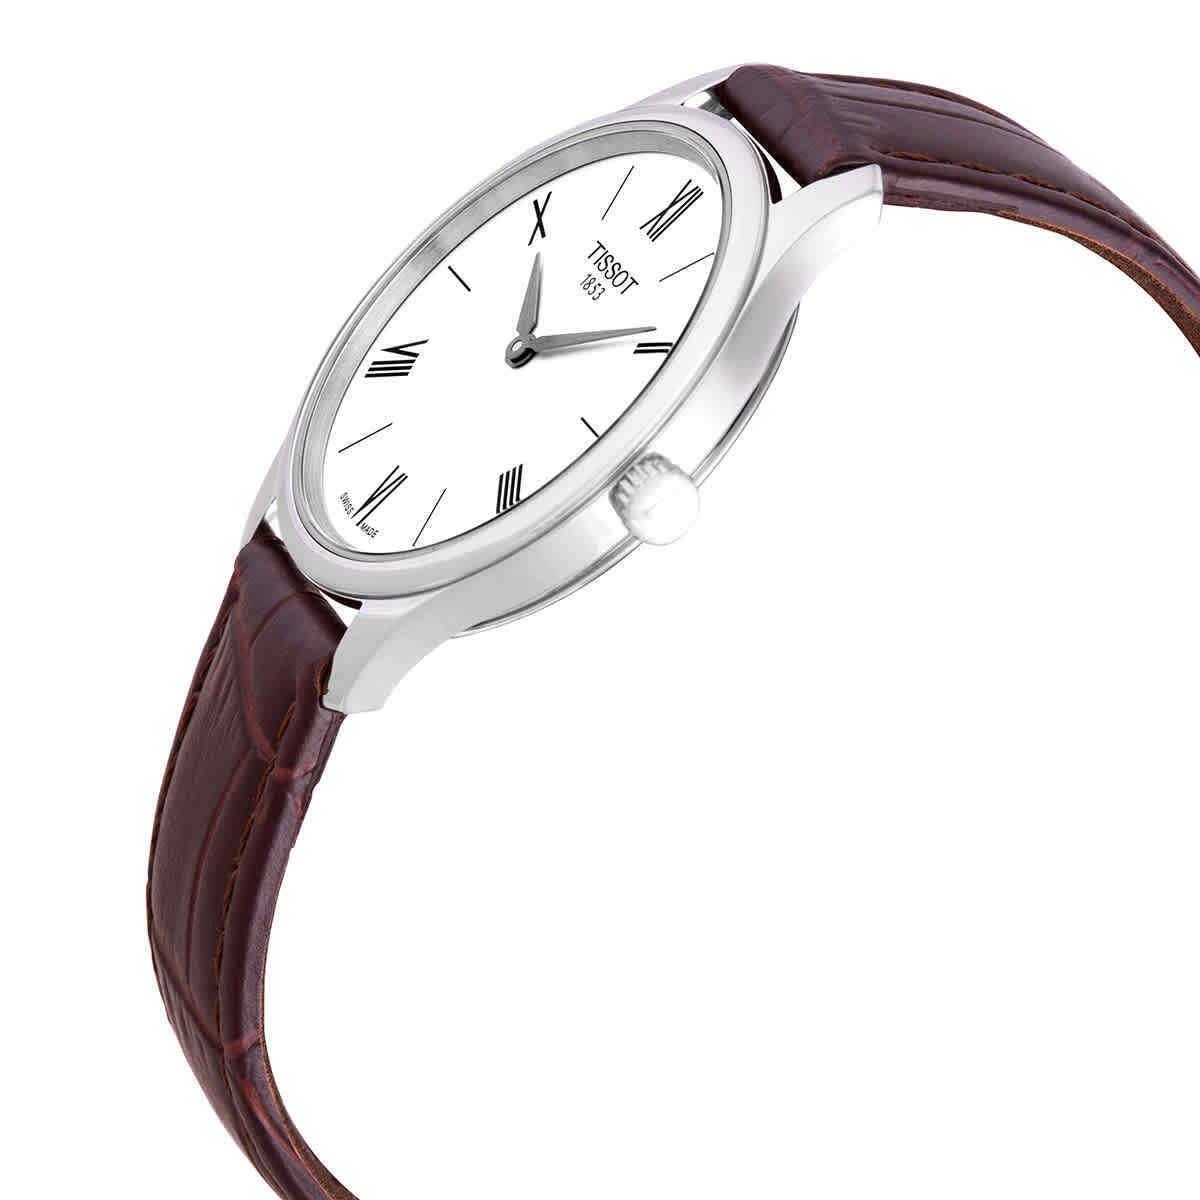 Tissot Tradition 5.5 Quartz Silver Dial Ladies Watch T063.209.16.038.00 - Dial: Silver, Band: Brown, Bezel: Silver